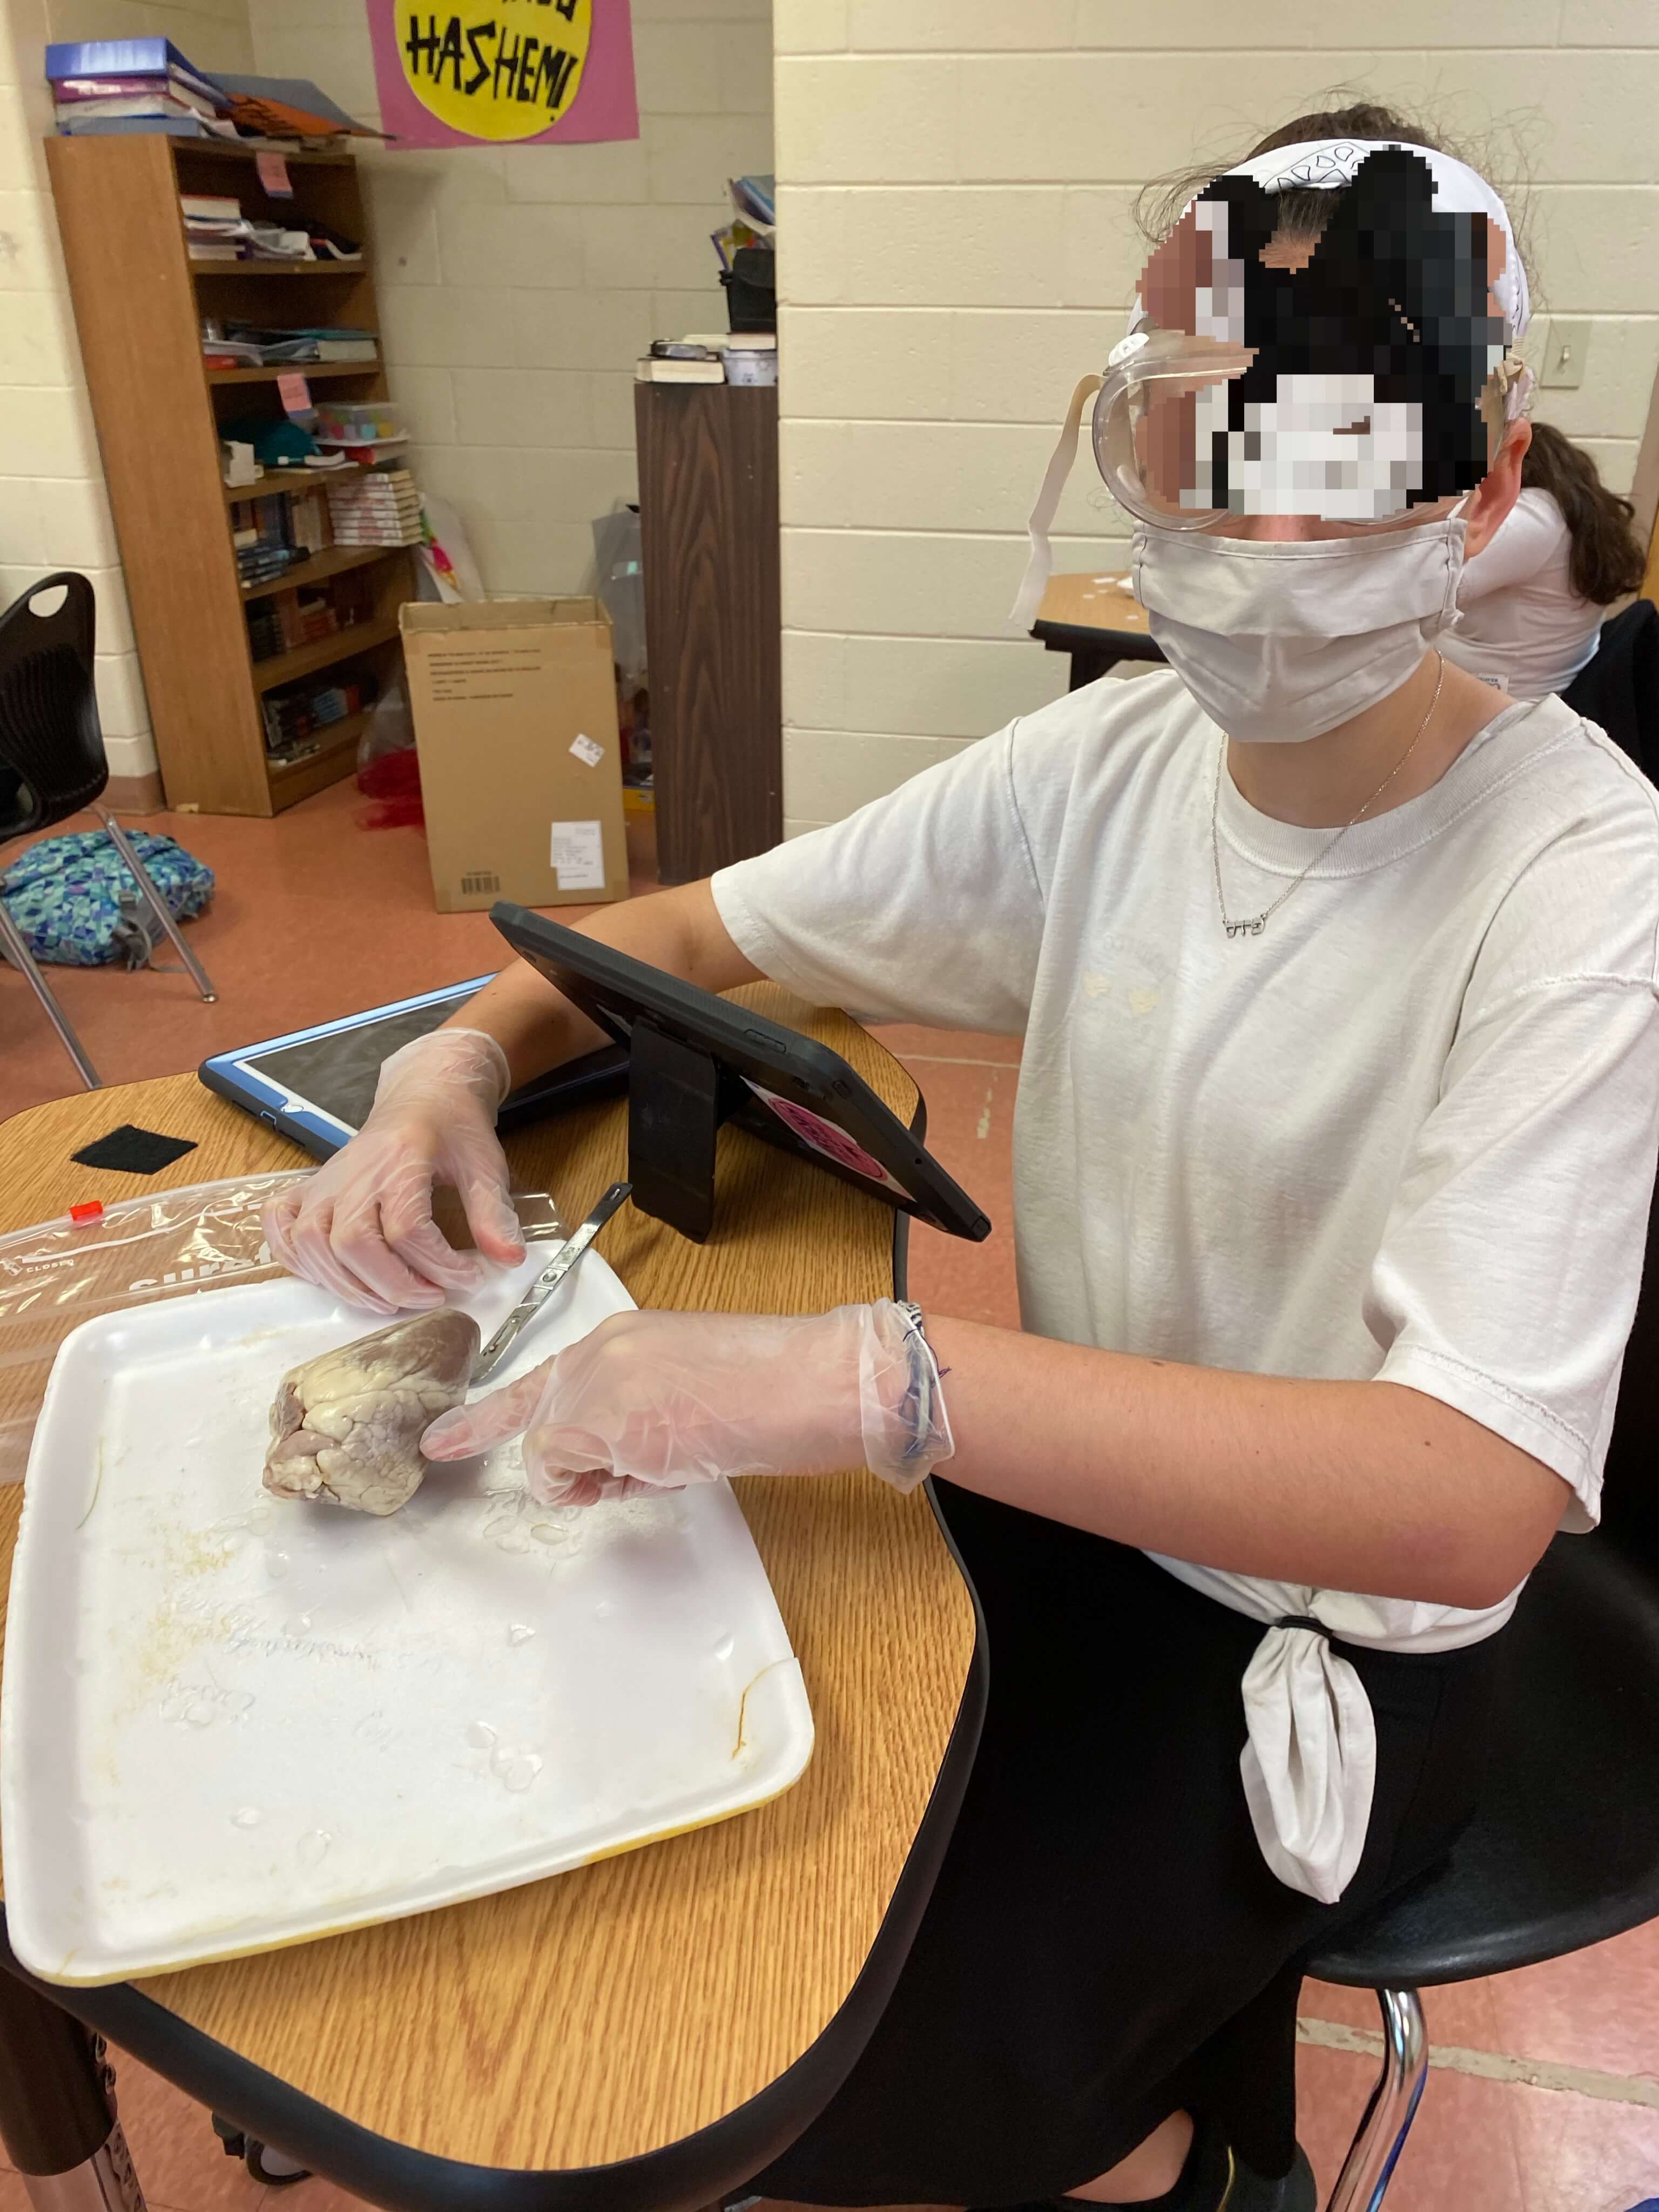 Taking photos and videos of dissection helps make the activity last longer